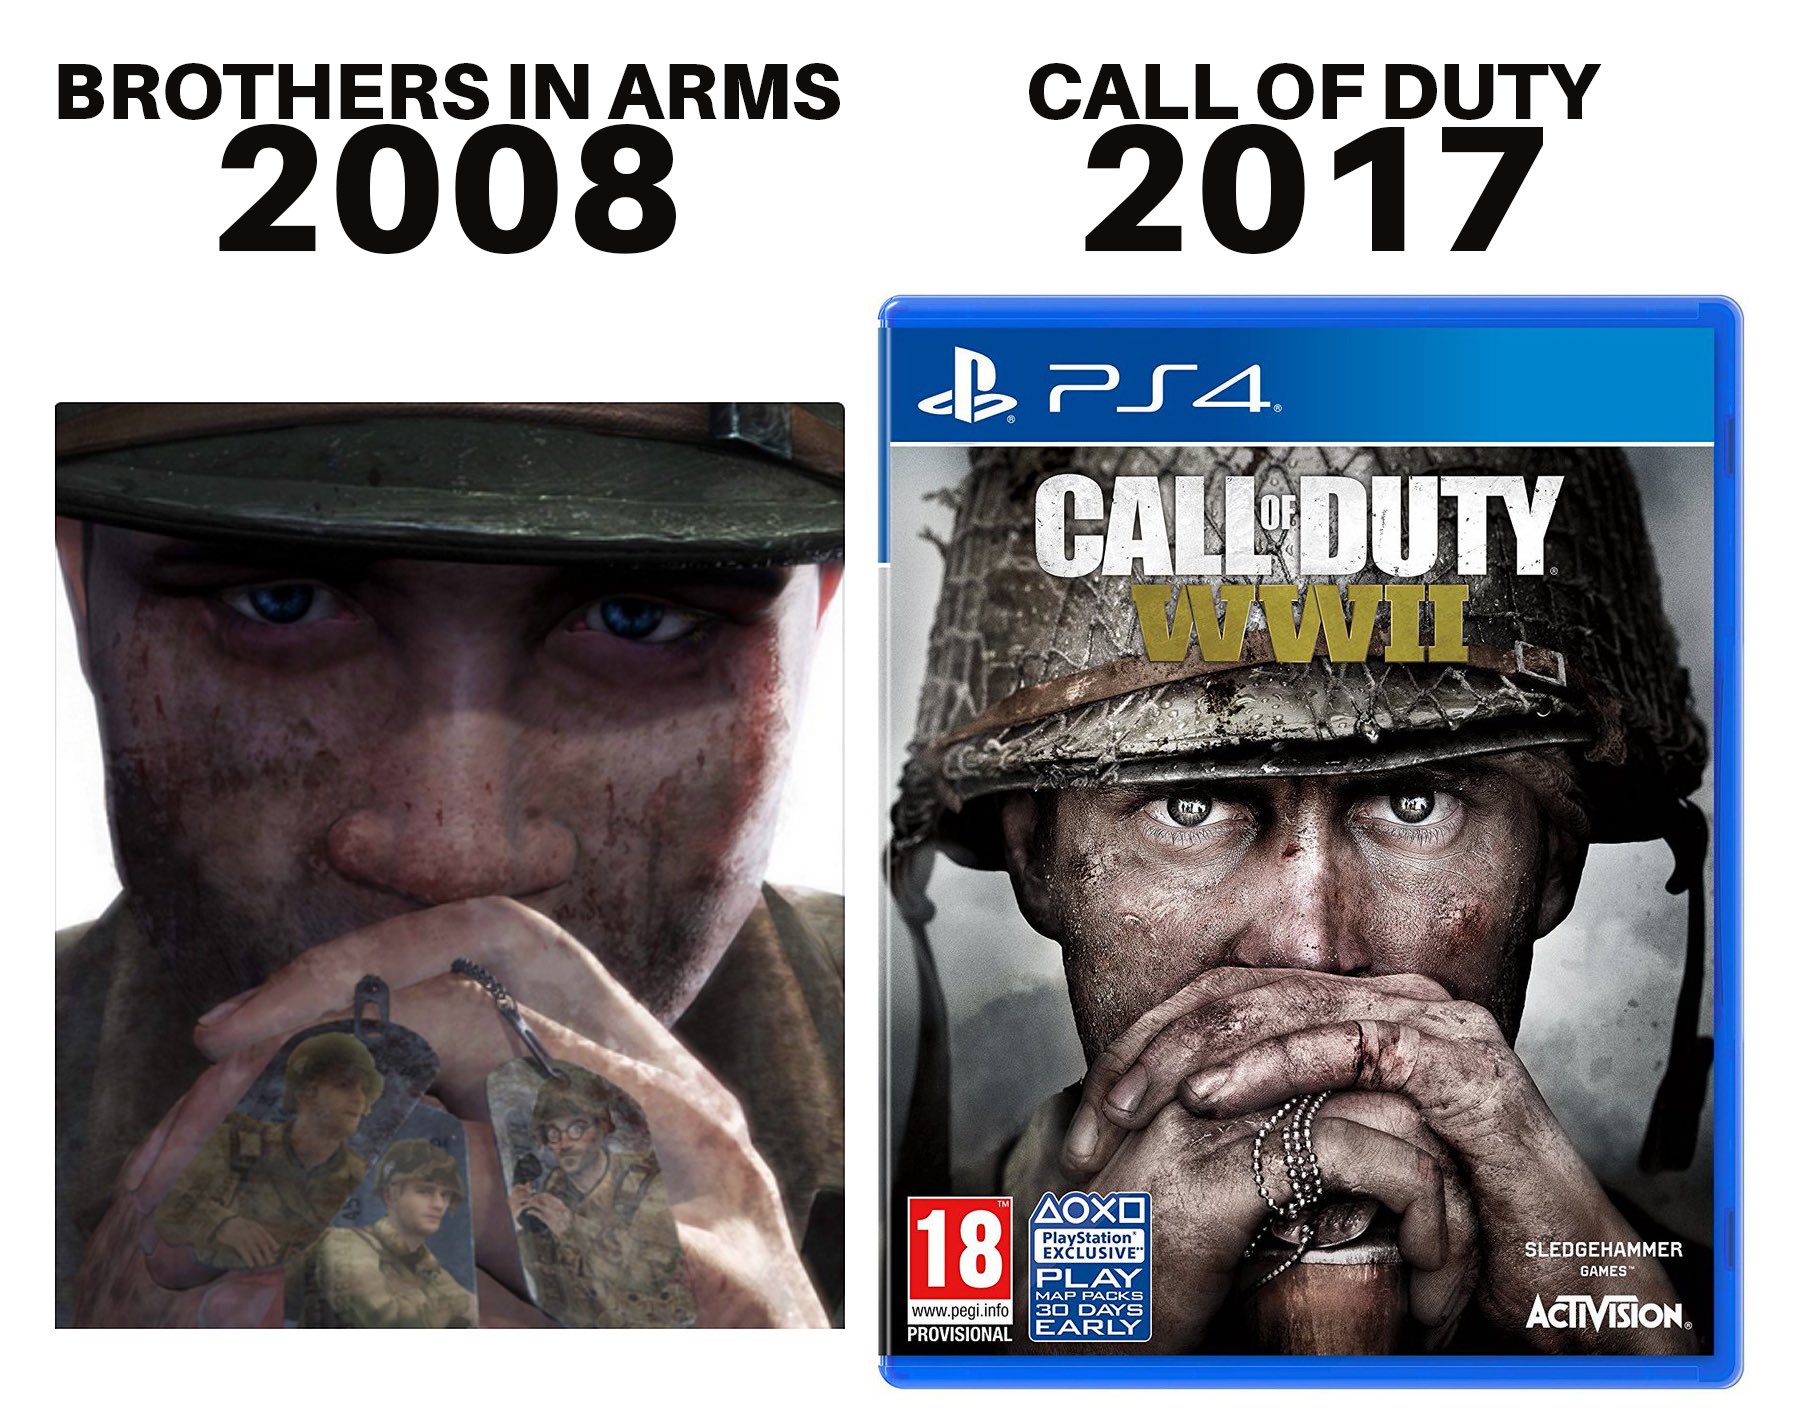 CoD-WWII-vs-Brothers-In-Arms-Box-Art-Comparison.jpg